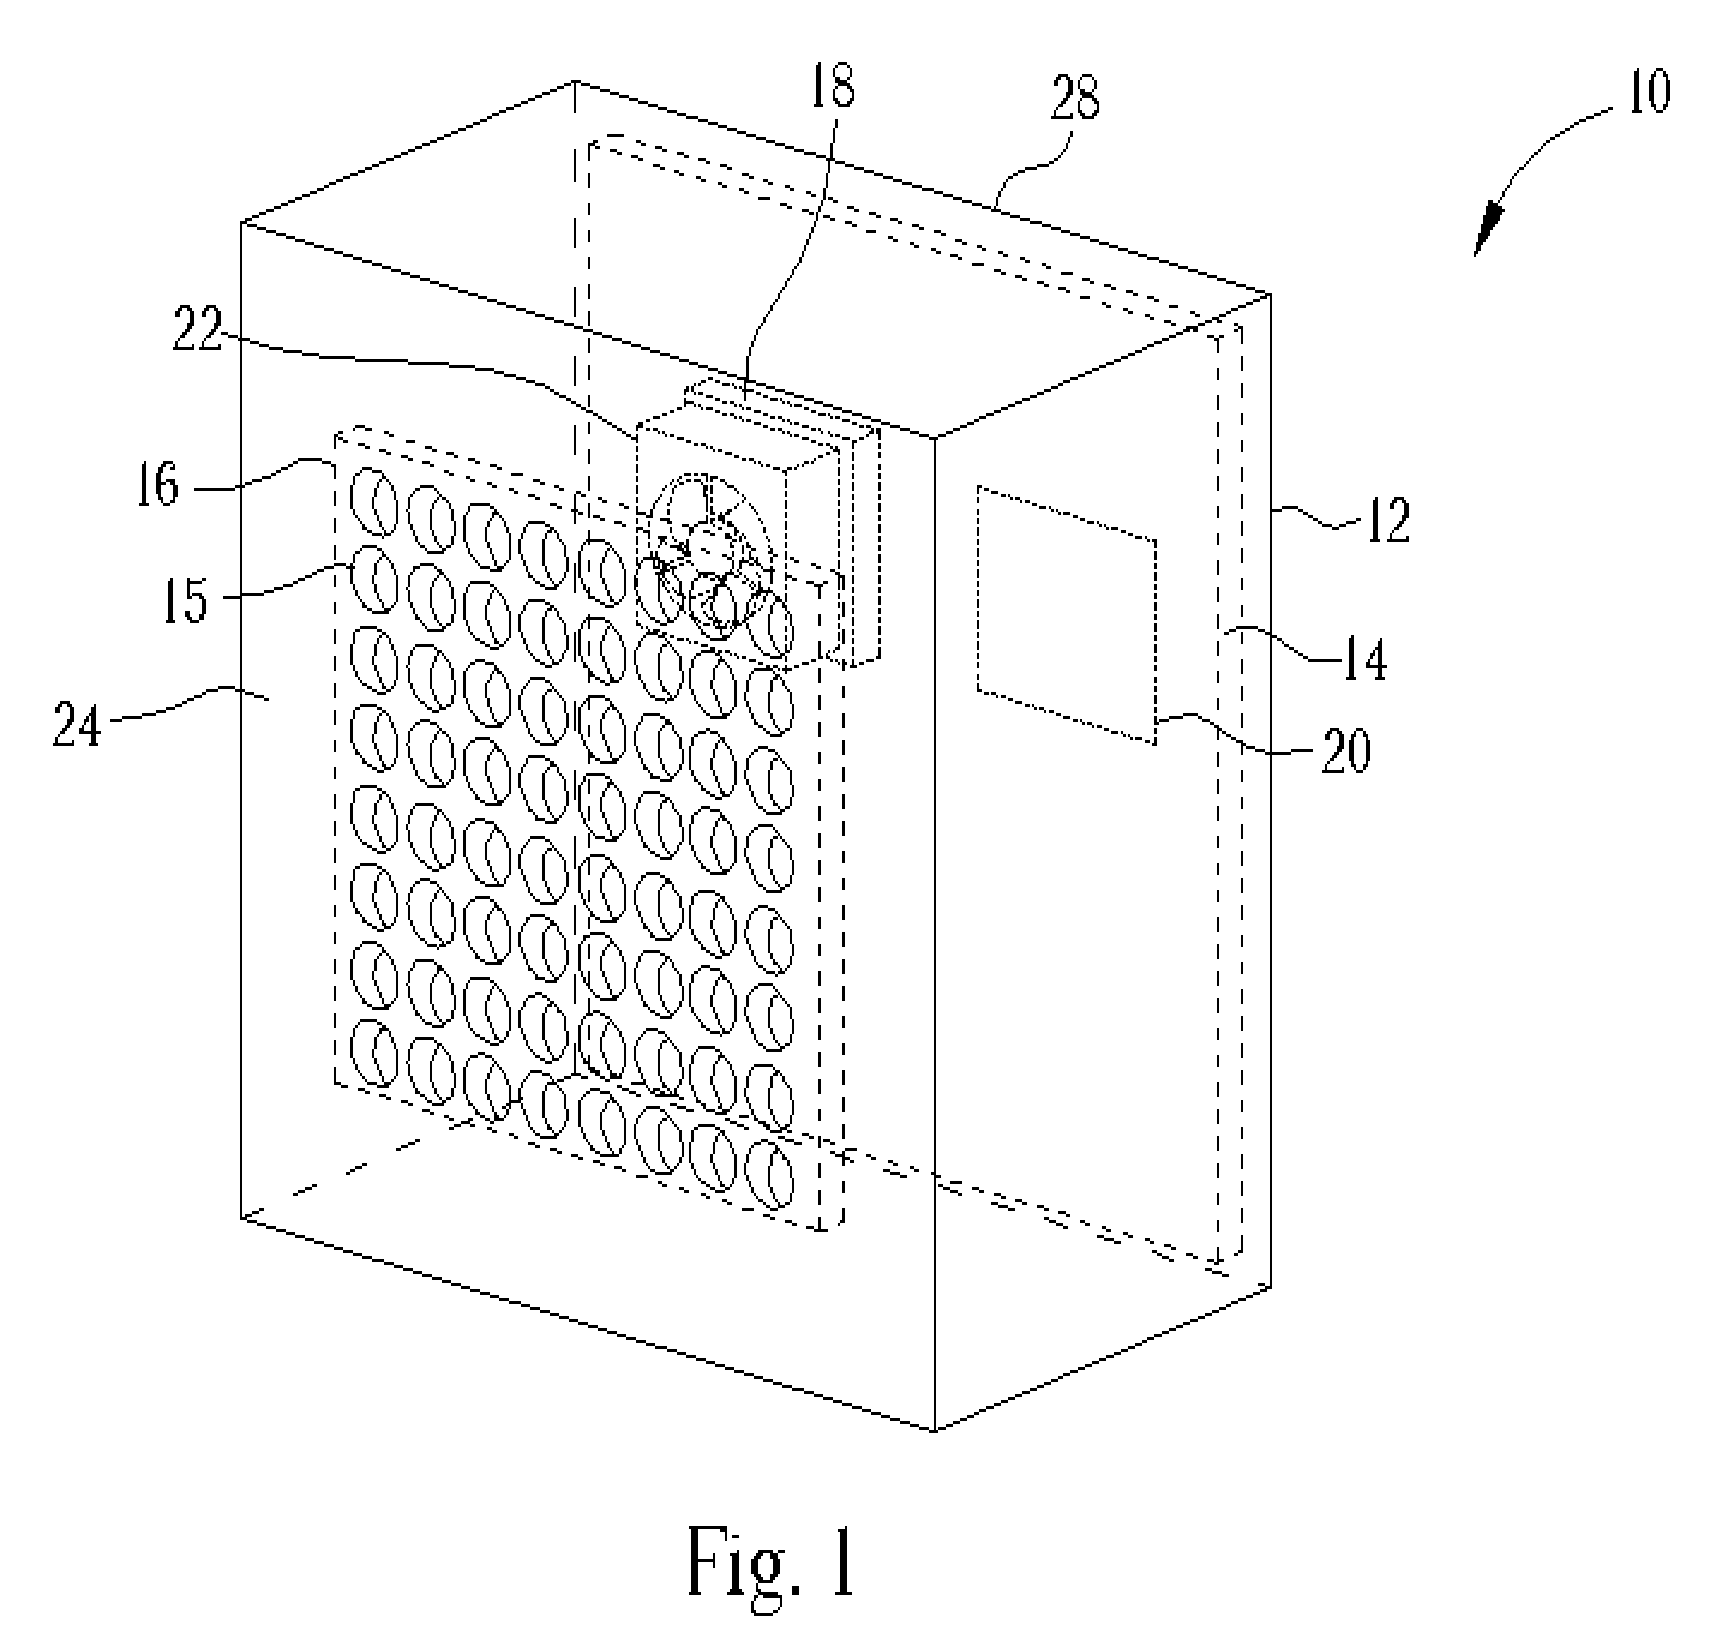 Electronic apparatus with a housing for seeing inside